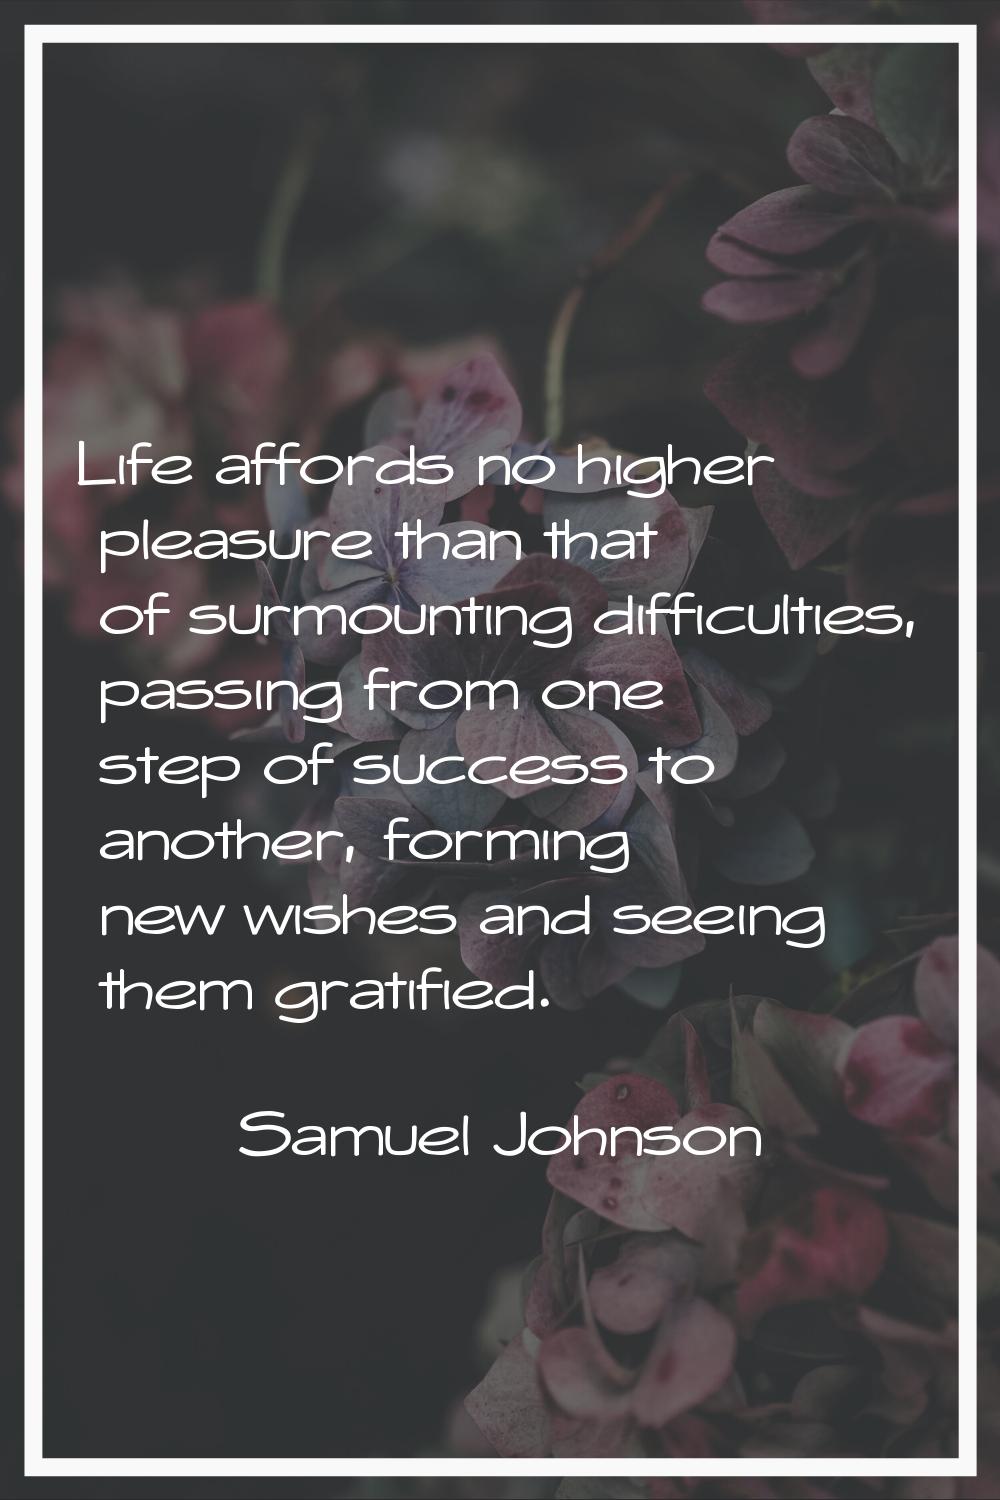 Life affords no higher pleasure than that of surmounting difficulties, passing from one step of suc